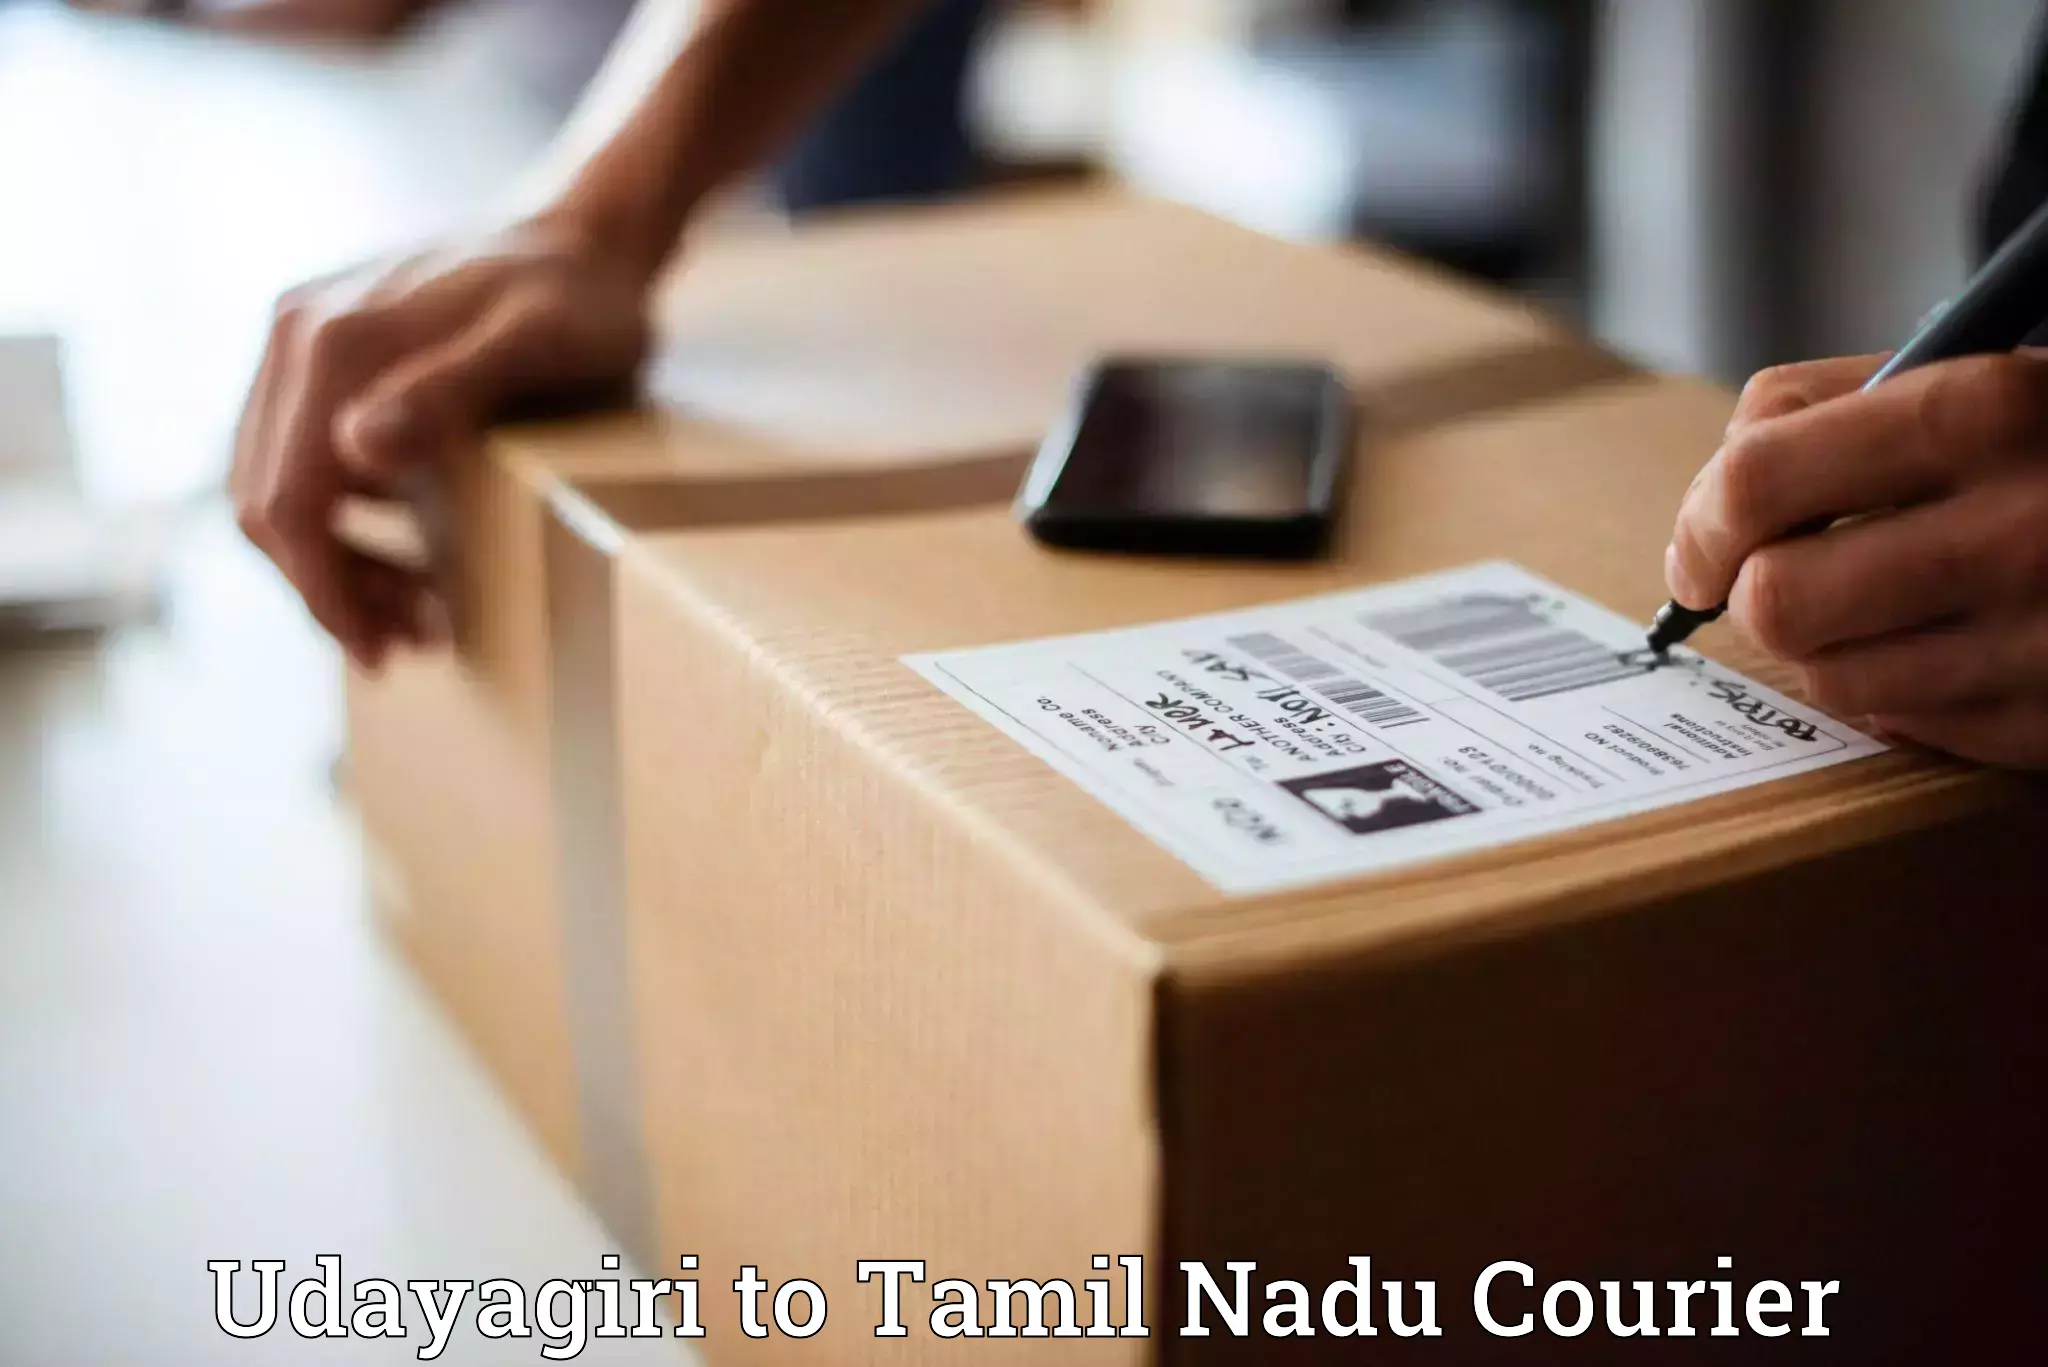 Express package delivery Udayagiri to Tamil Nadu